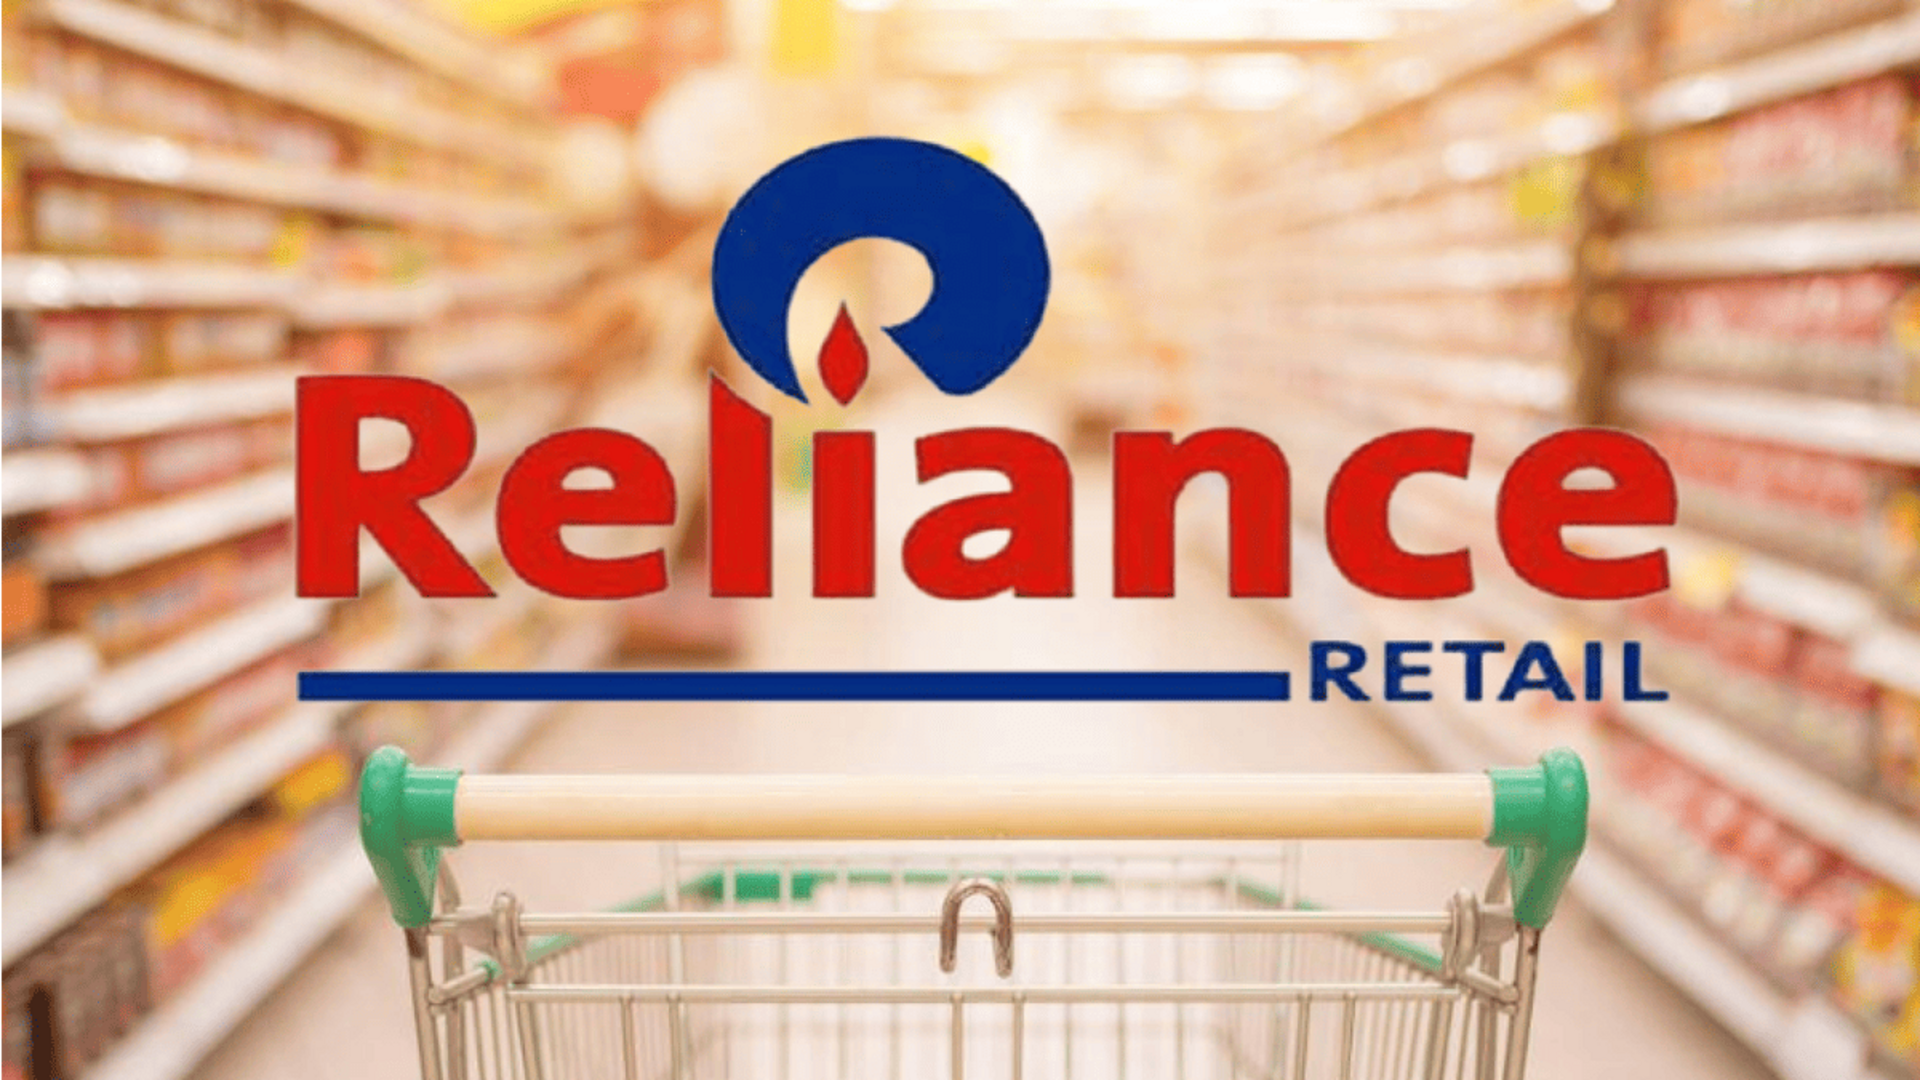 Reliance Retail enters quick commerce race with 1-hour delivery pilot